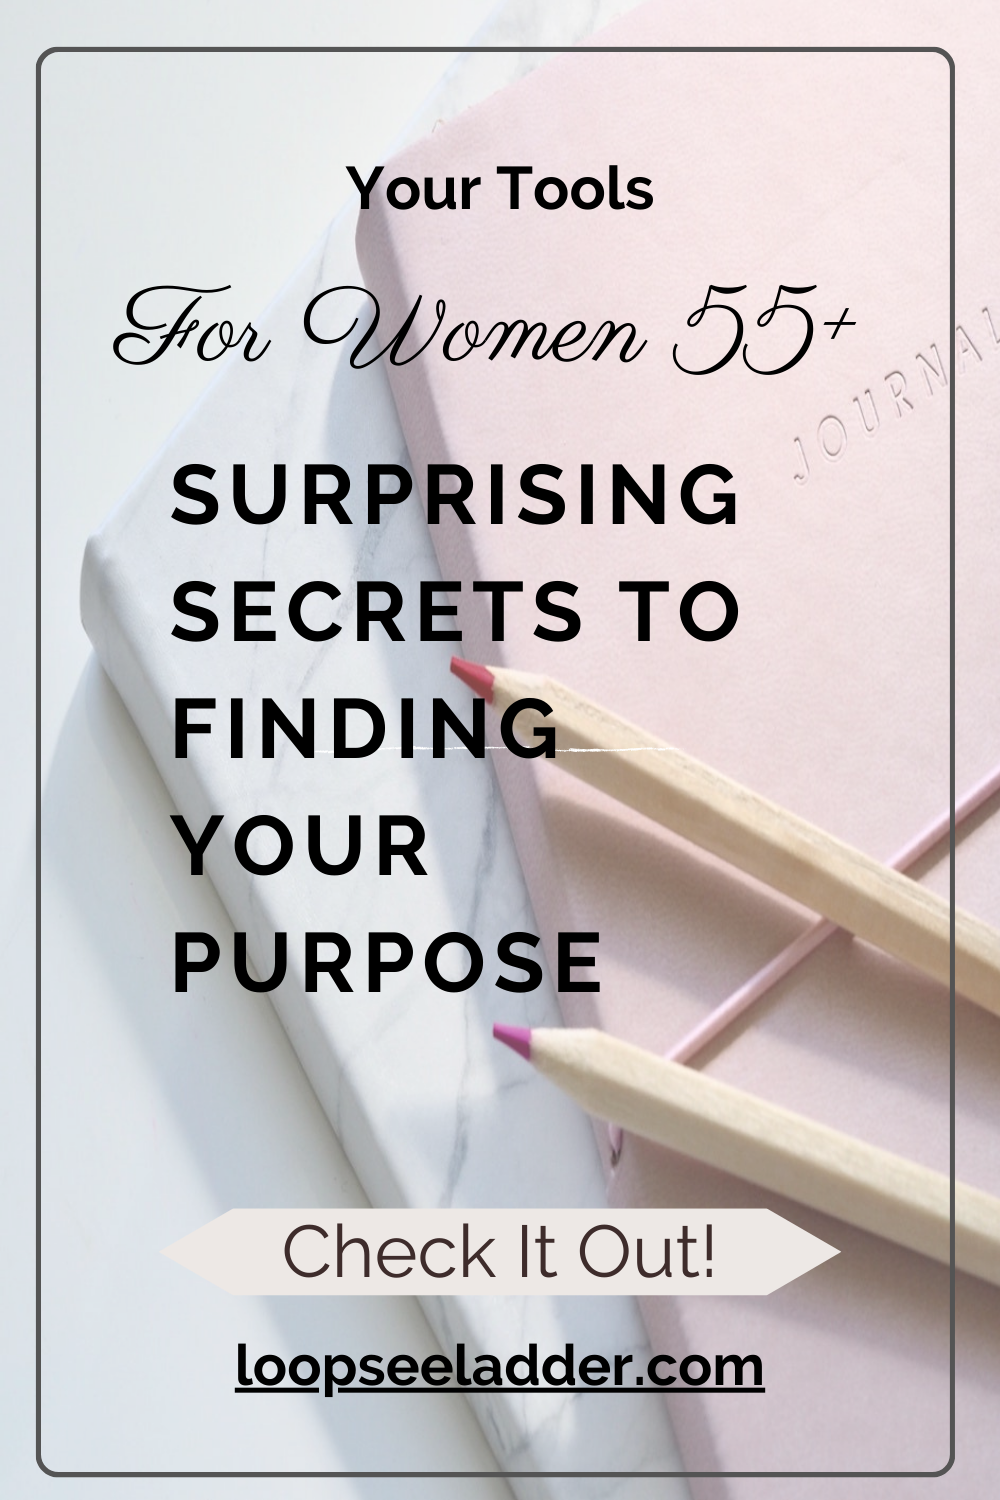 The Surprising Secrets to Finding Purpose After 55